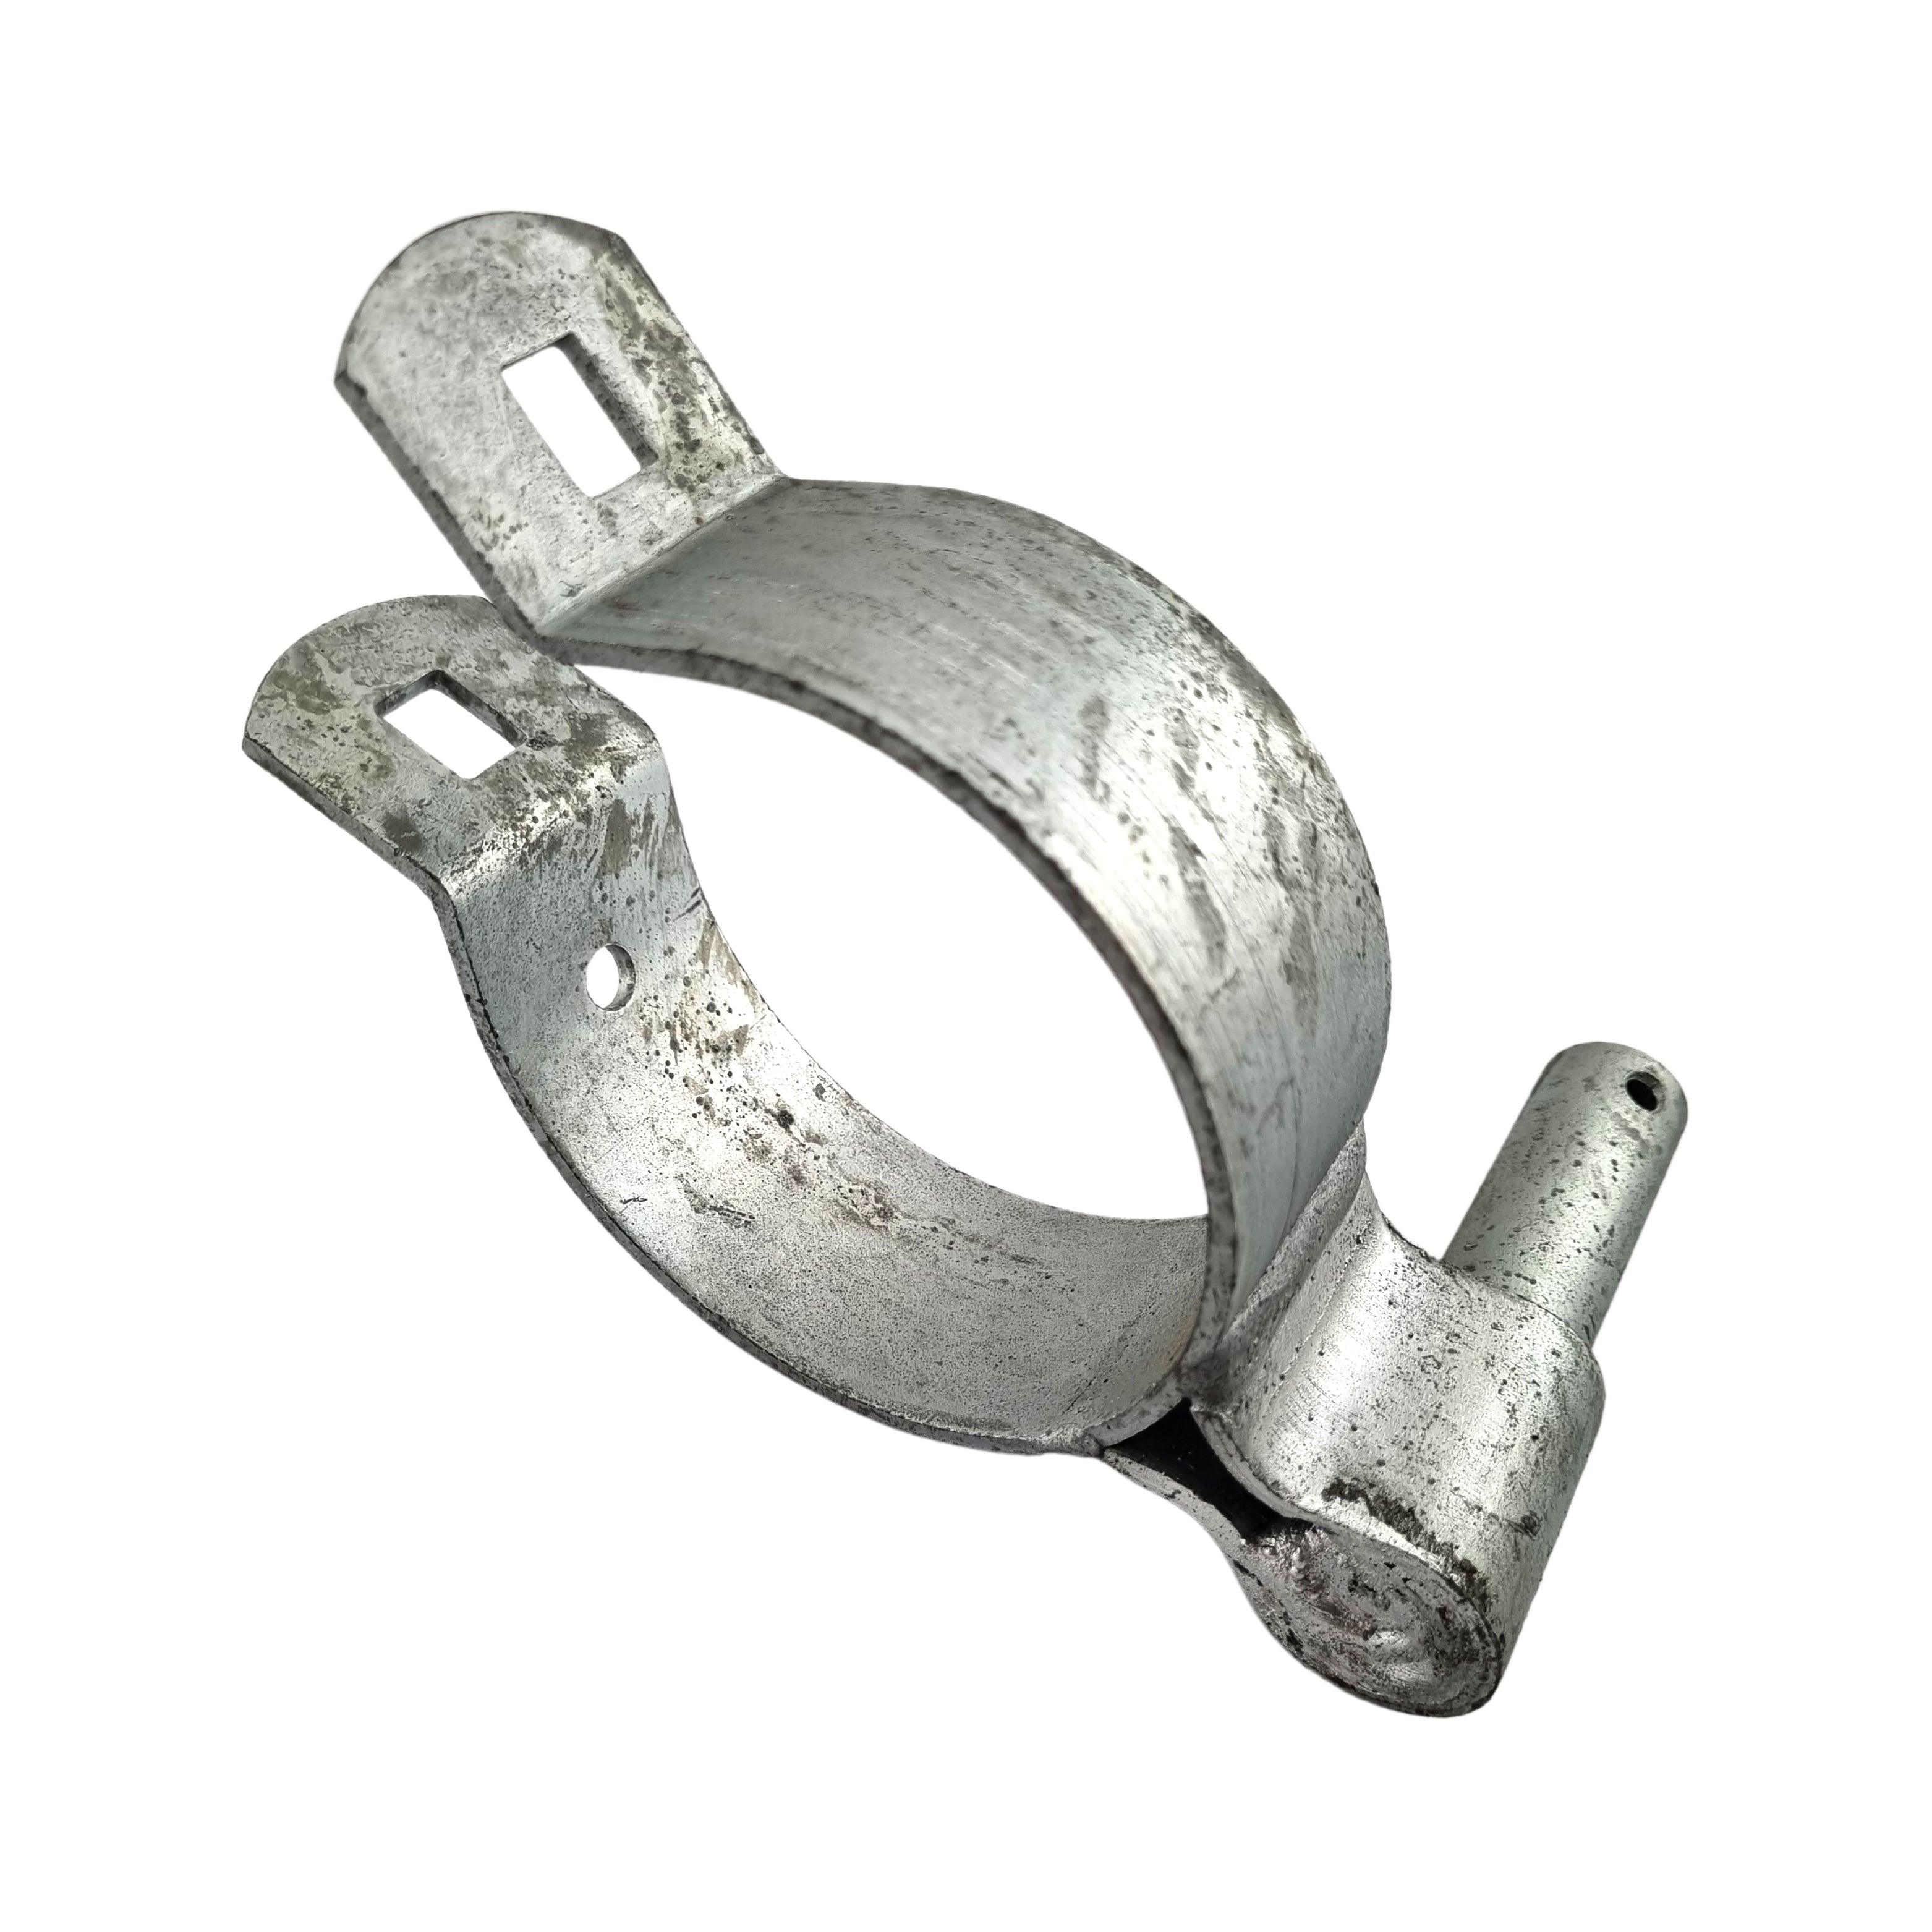 Strap Gudgeon Hinge Galvanised. Australian made. Shop weld on fittings, rural hardware plus fence and gate fittings online. Chain.com.au. Australia wide shipping.